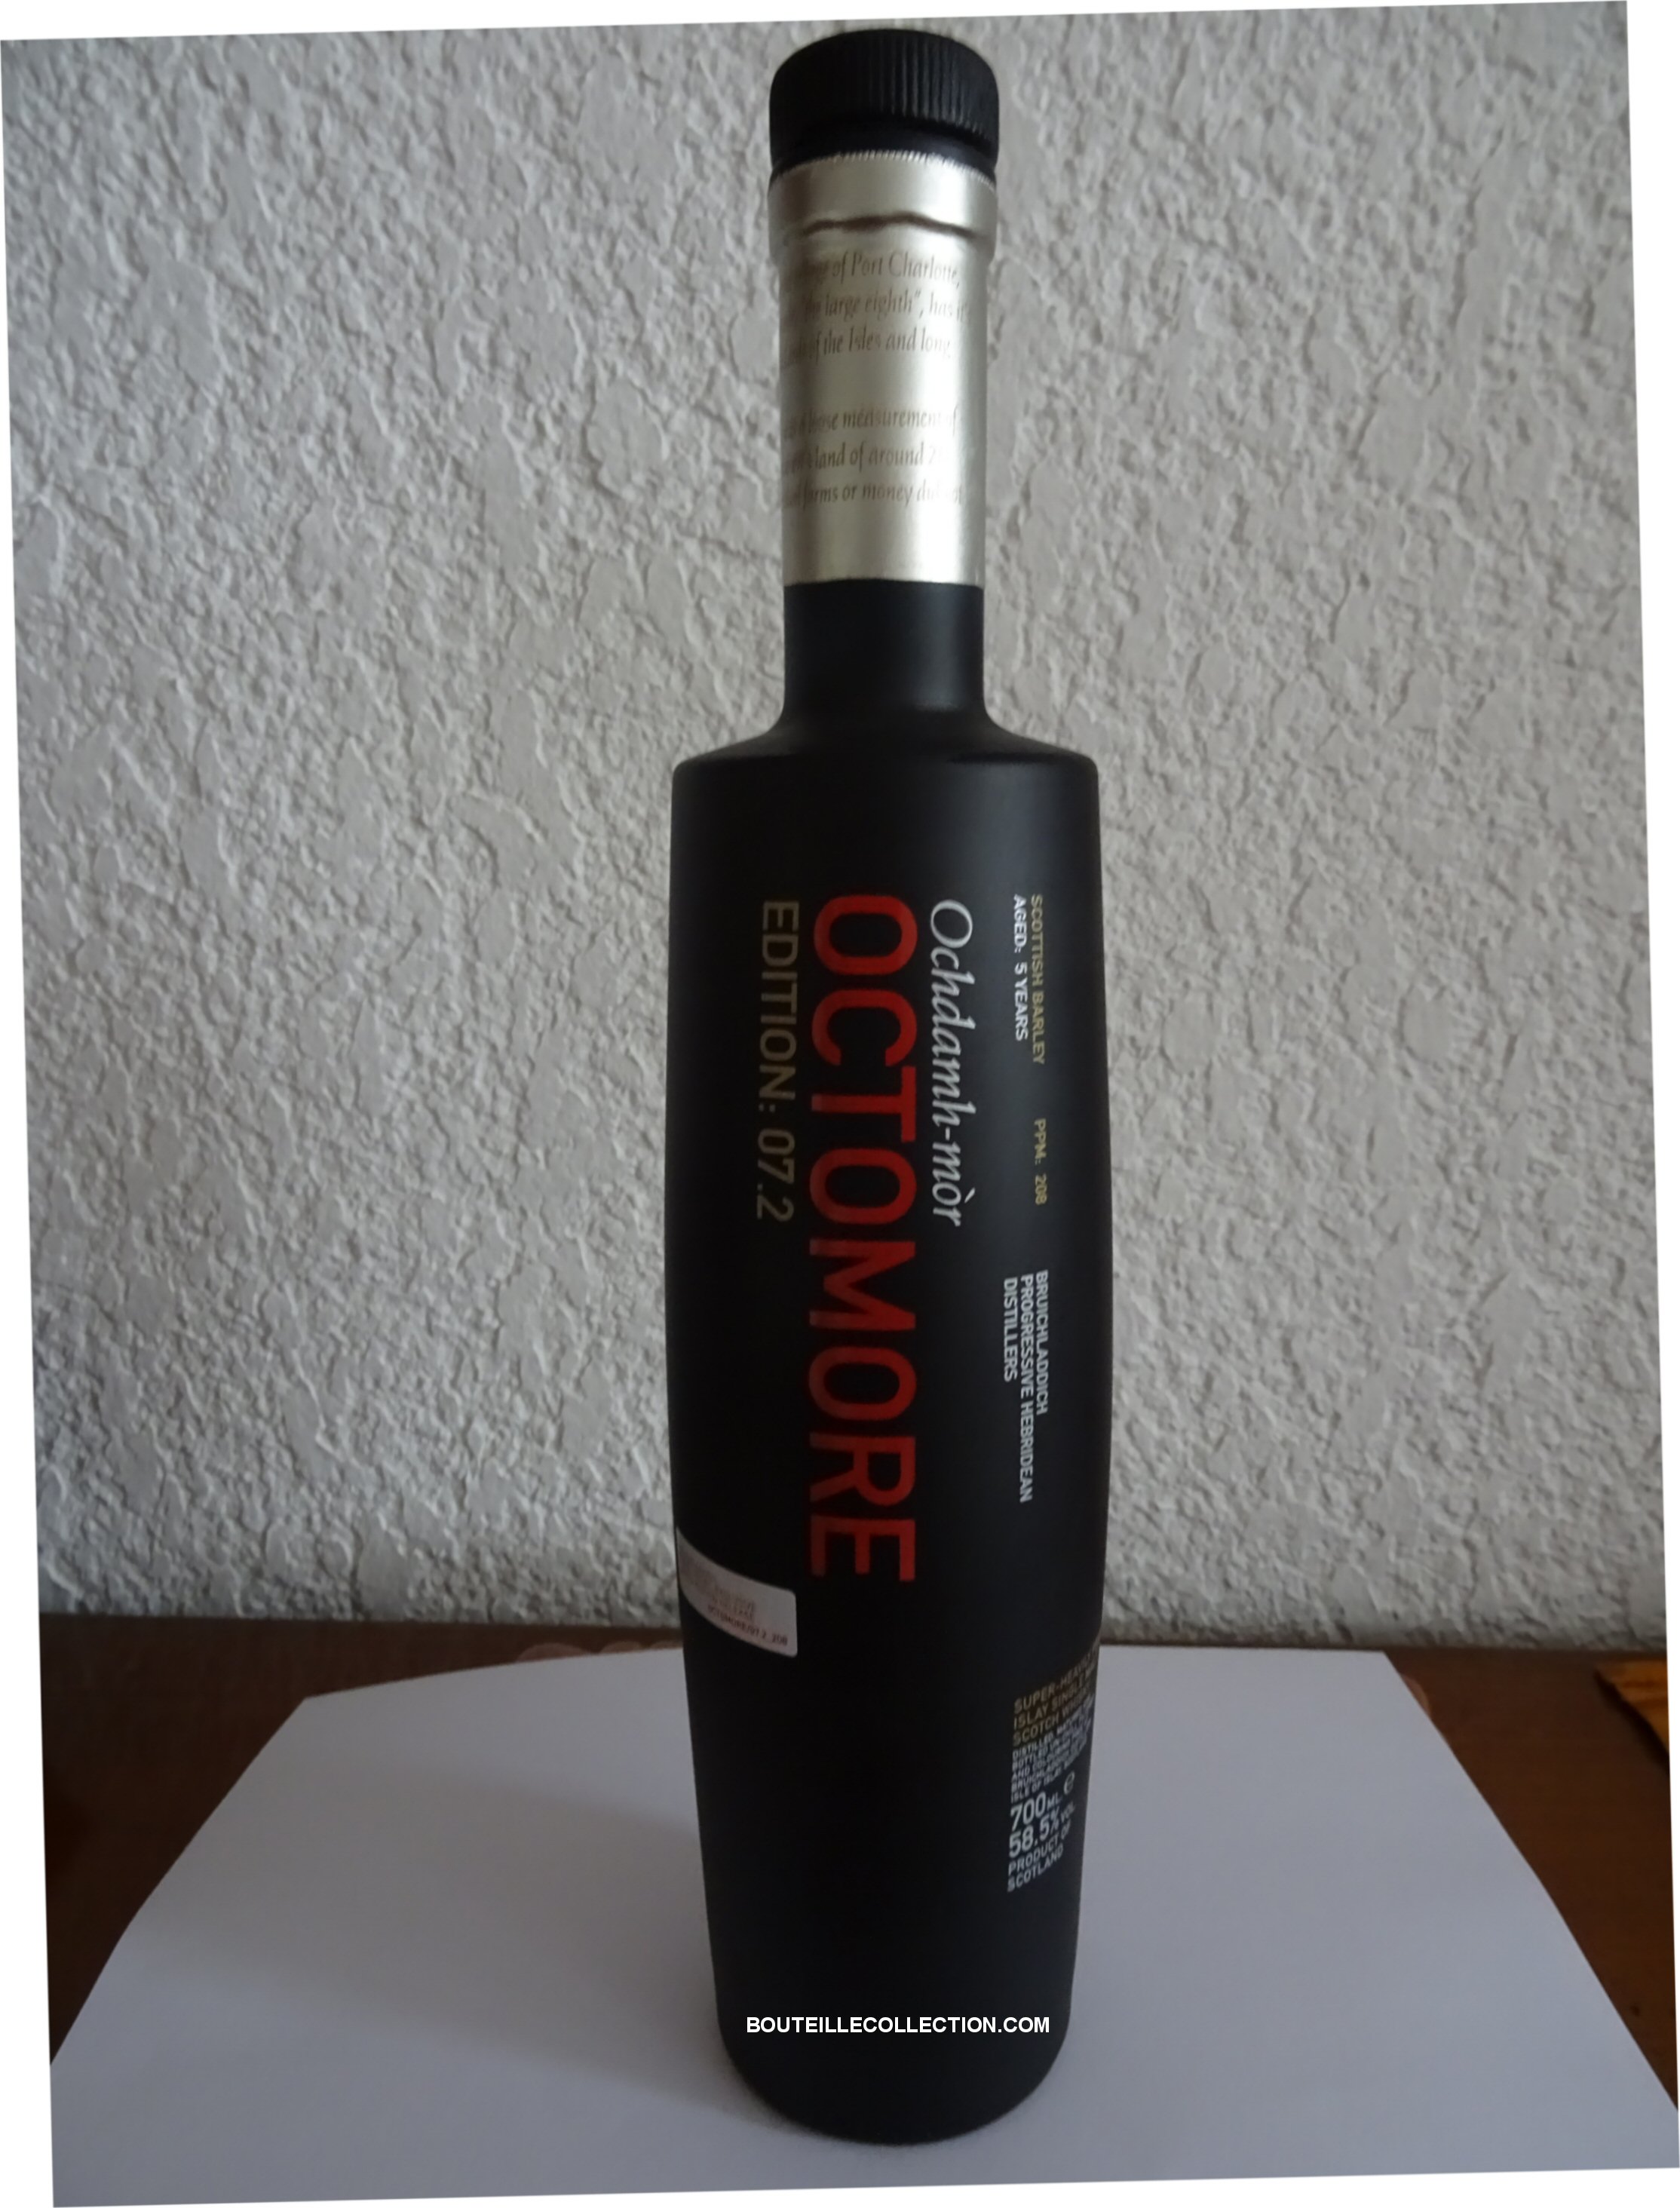 OCTOMORE EDITION 07.2 70CL B .jpg